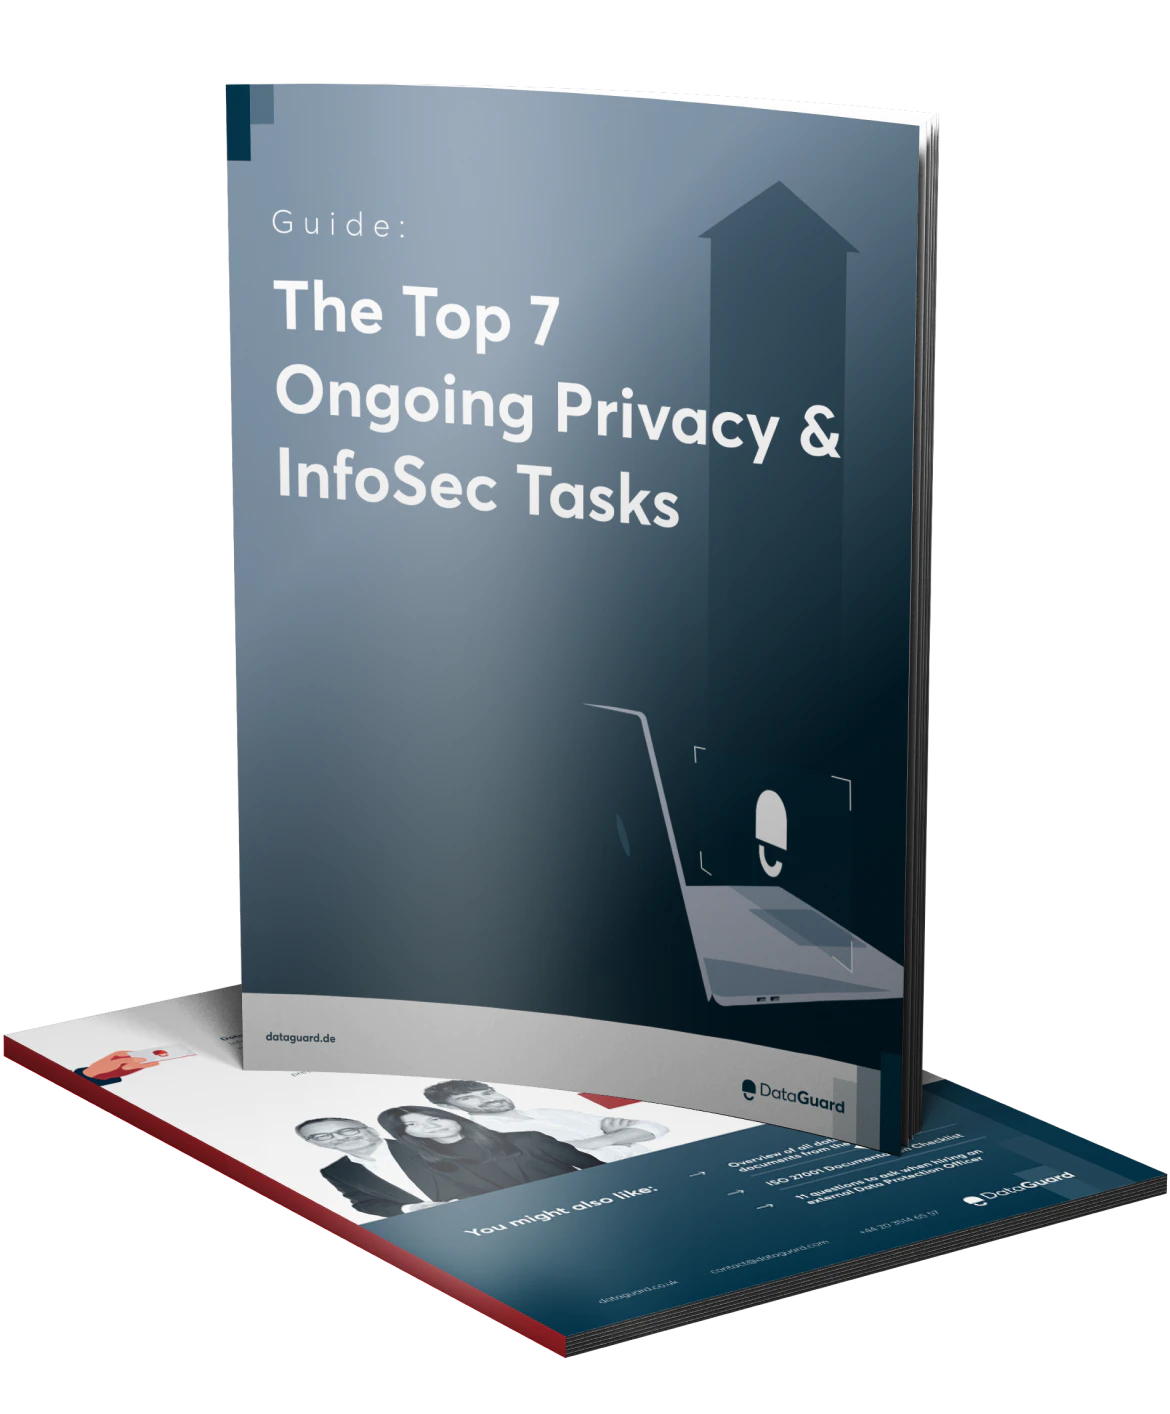 Preview Top 7 Ongoing Privacy & InfoSec Tasks UK